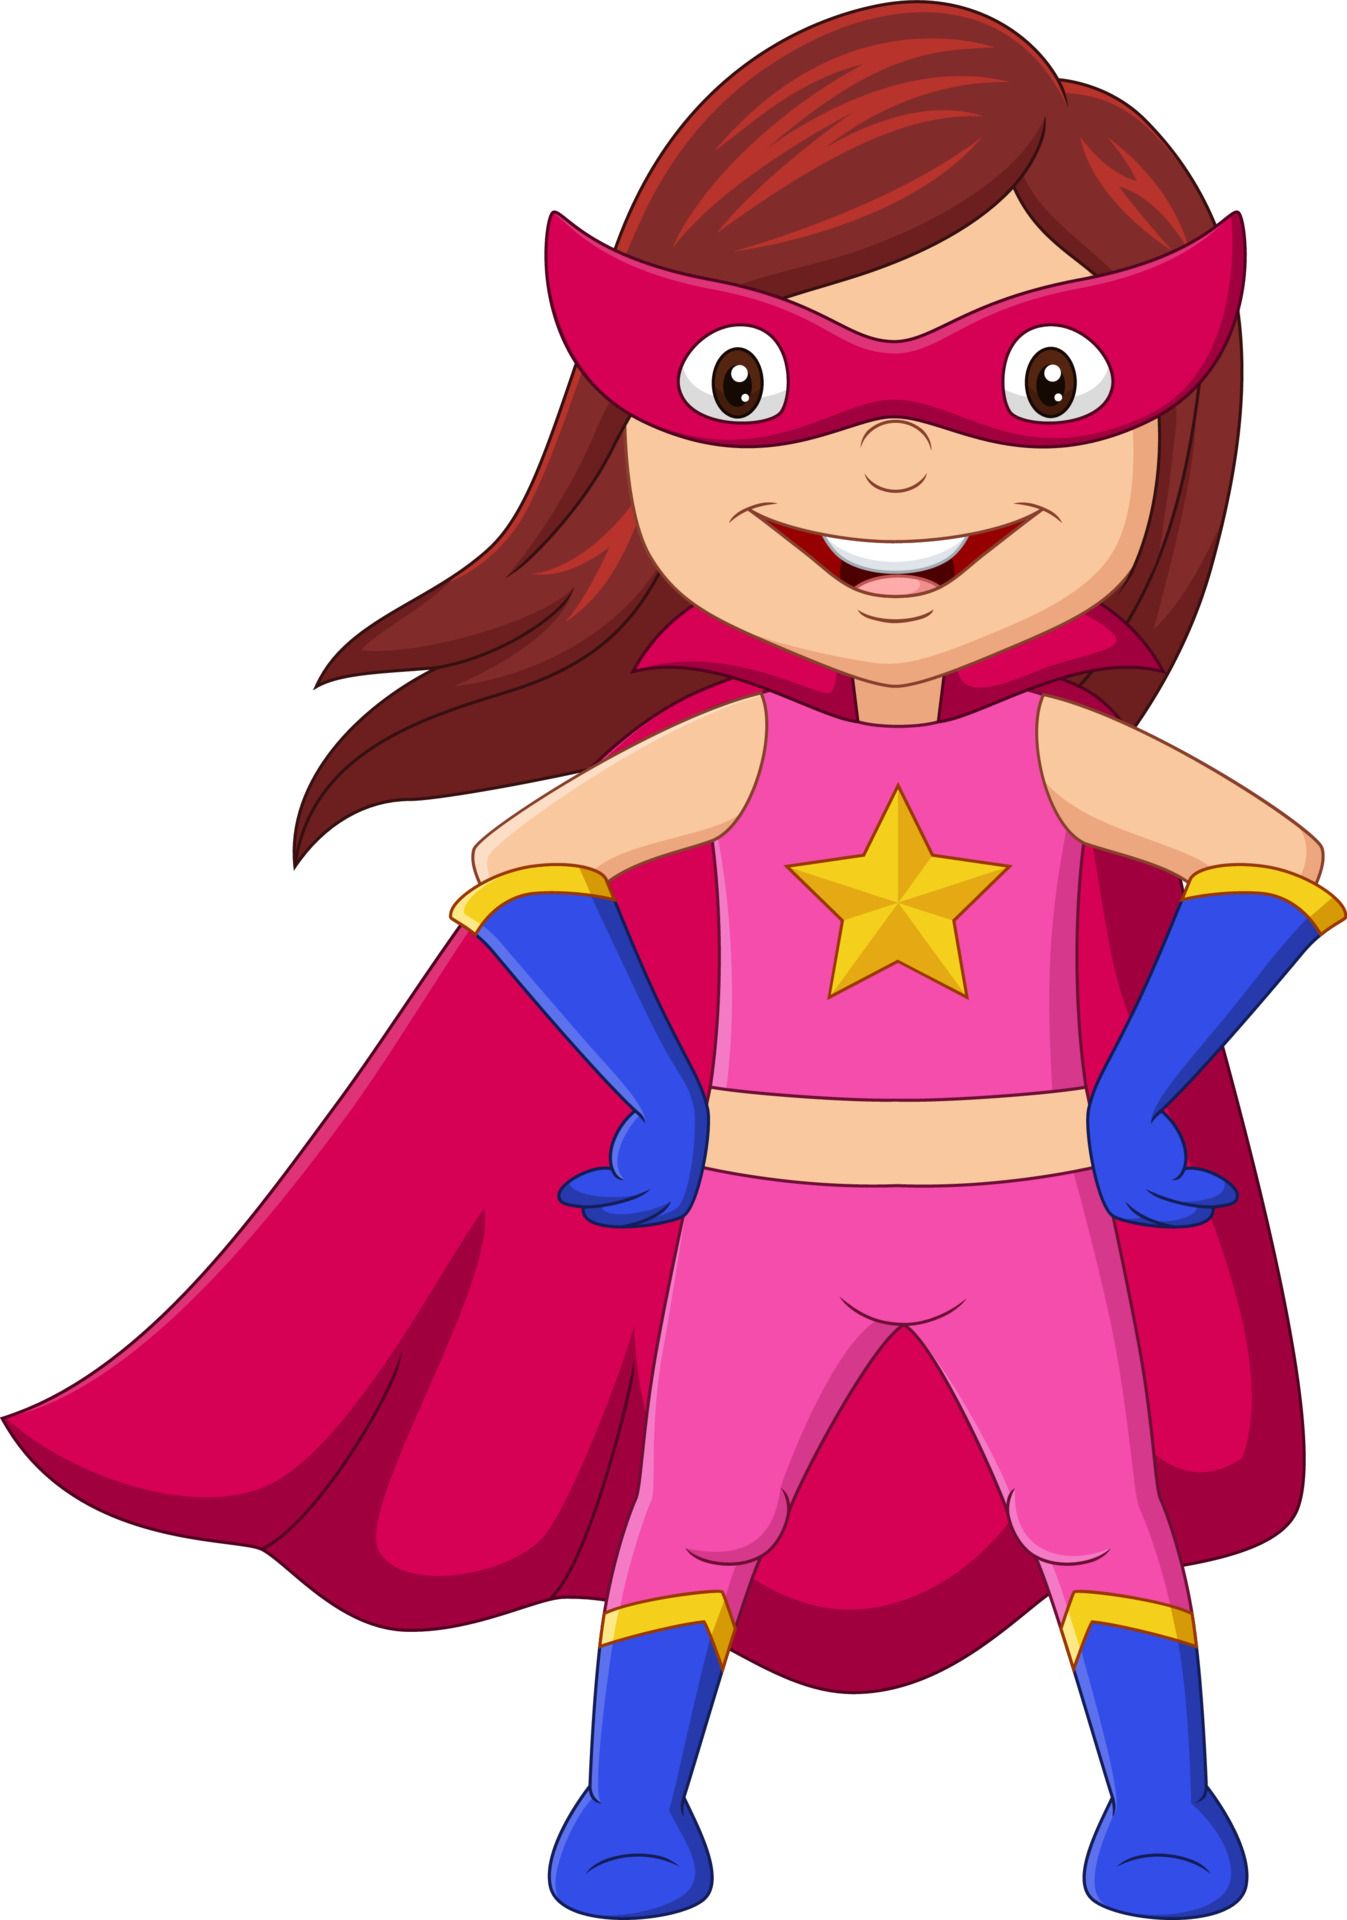 A cartoon girl in a superhero costume is standing with her hands on her hips.